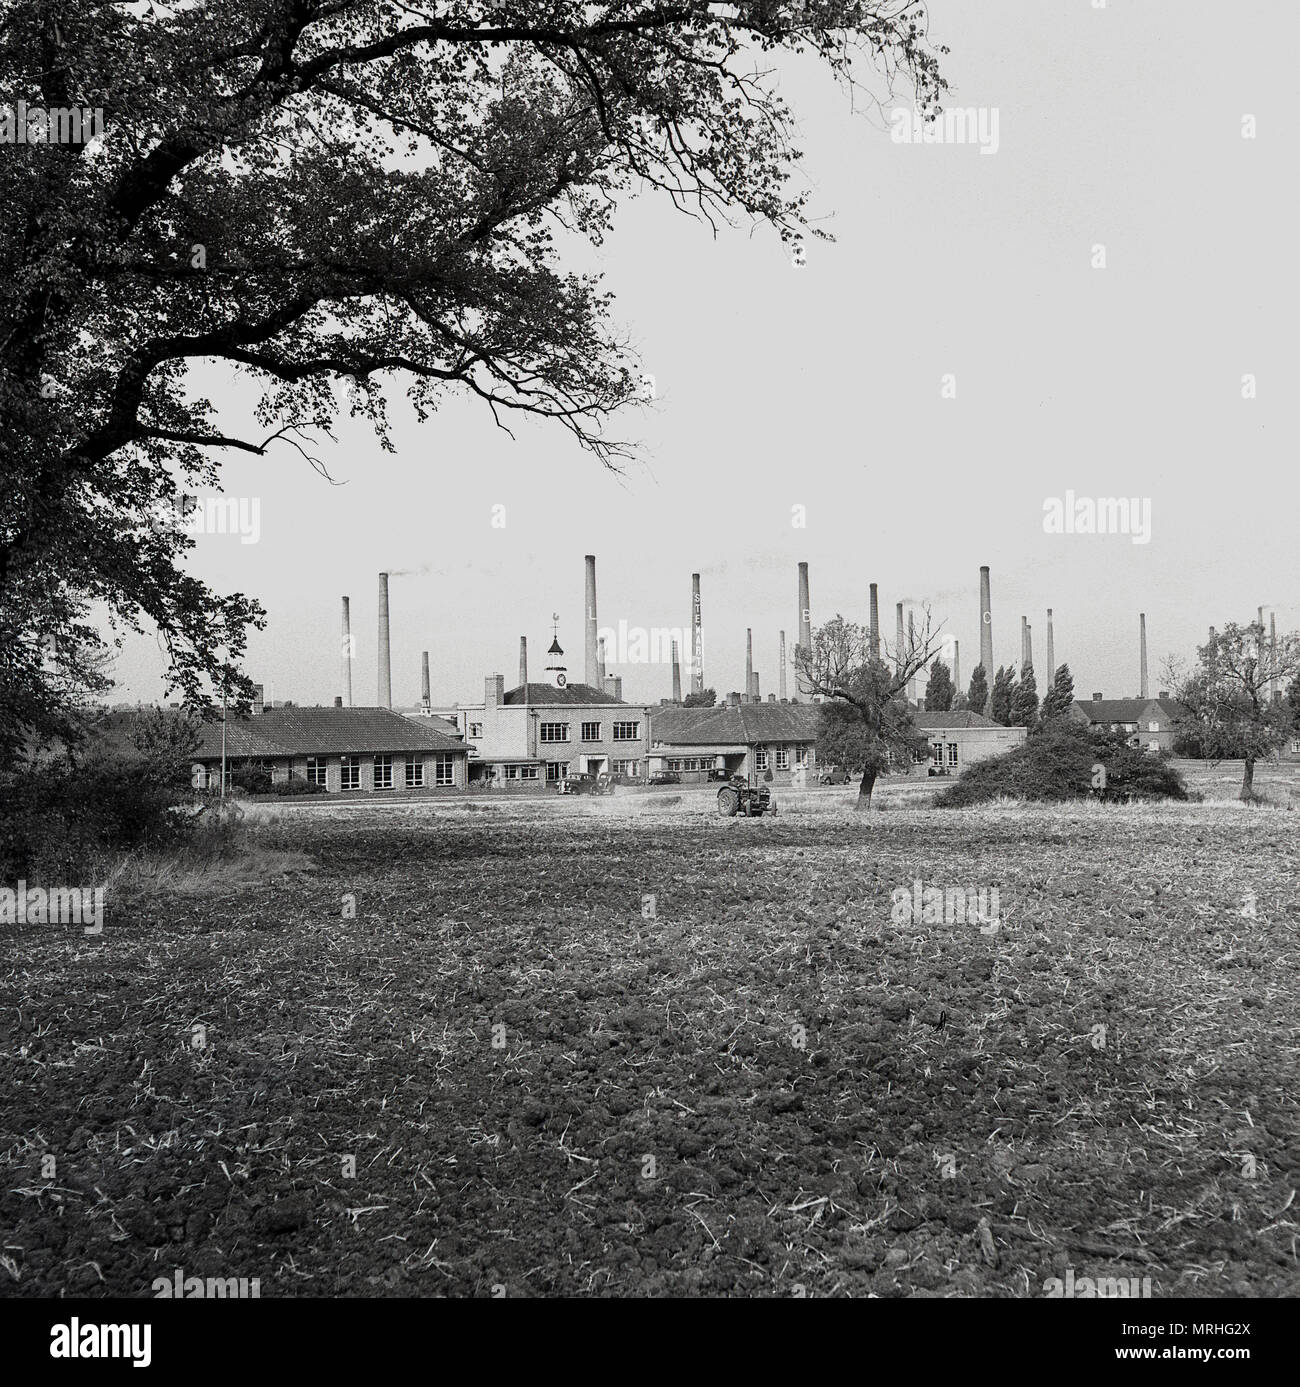 1950s, historical, view across a field showing the chimneys of the London Brick Company, Stewartby, Bedfordshire, England, UK. The brickworks were home to the world's largest kiln and next to the giant industrial site, was a 'model 'village built to house the factory workers. Originally a farming area called Wootton Pillinge, it was renamed 'Stewartby' in 1937 after the Stewart family who created the brickworks. Stock Photo